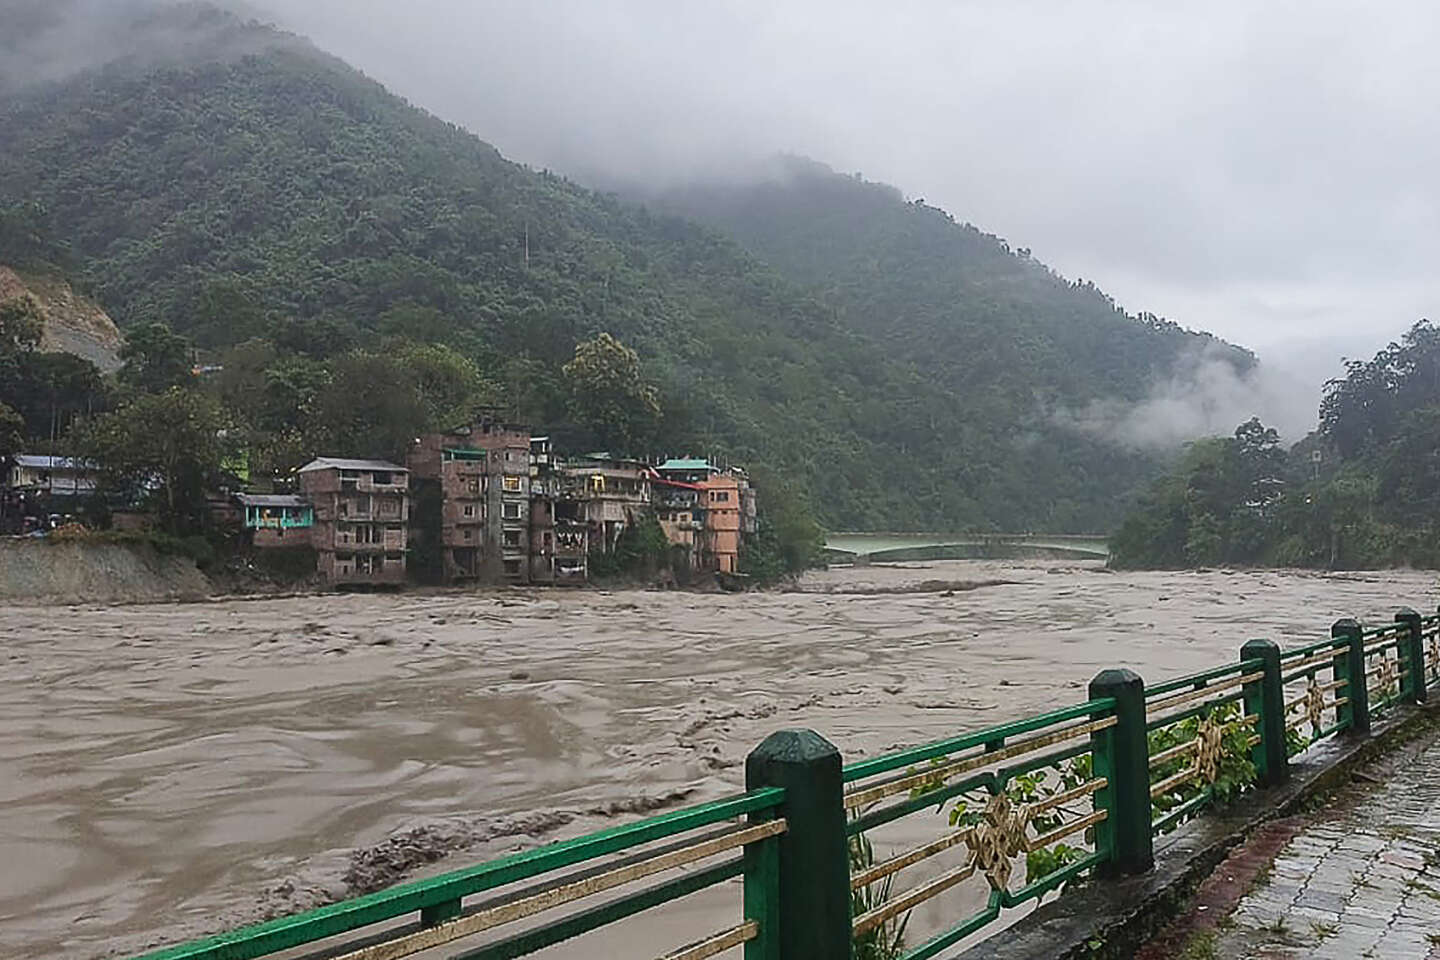 At least 10 people have been killed and 102 others missing following flash floods in the Himalayas